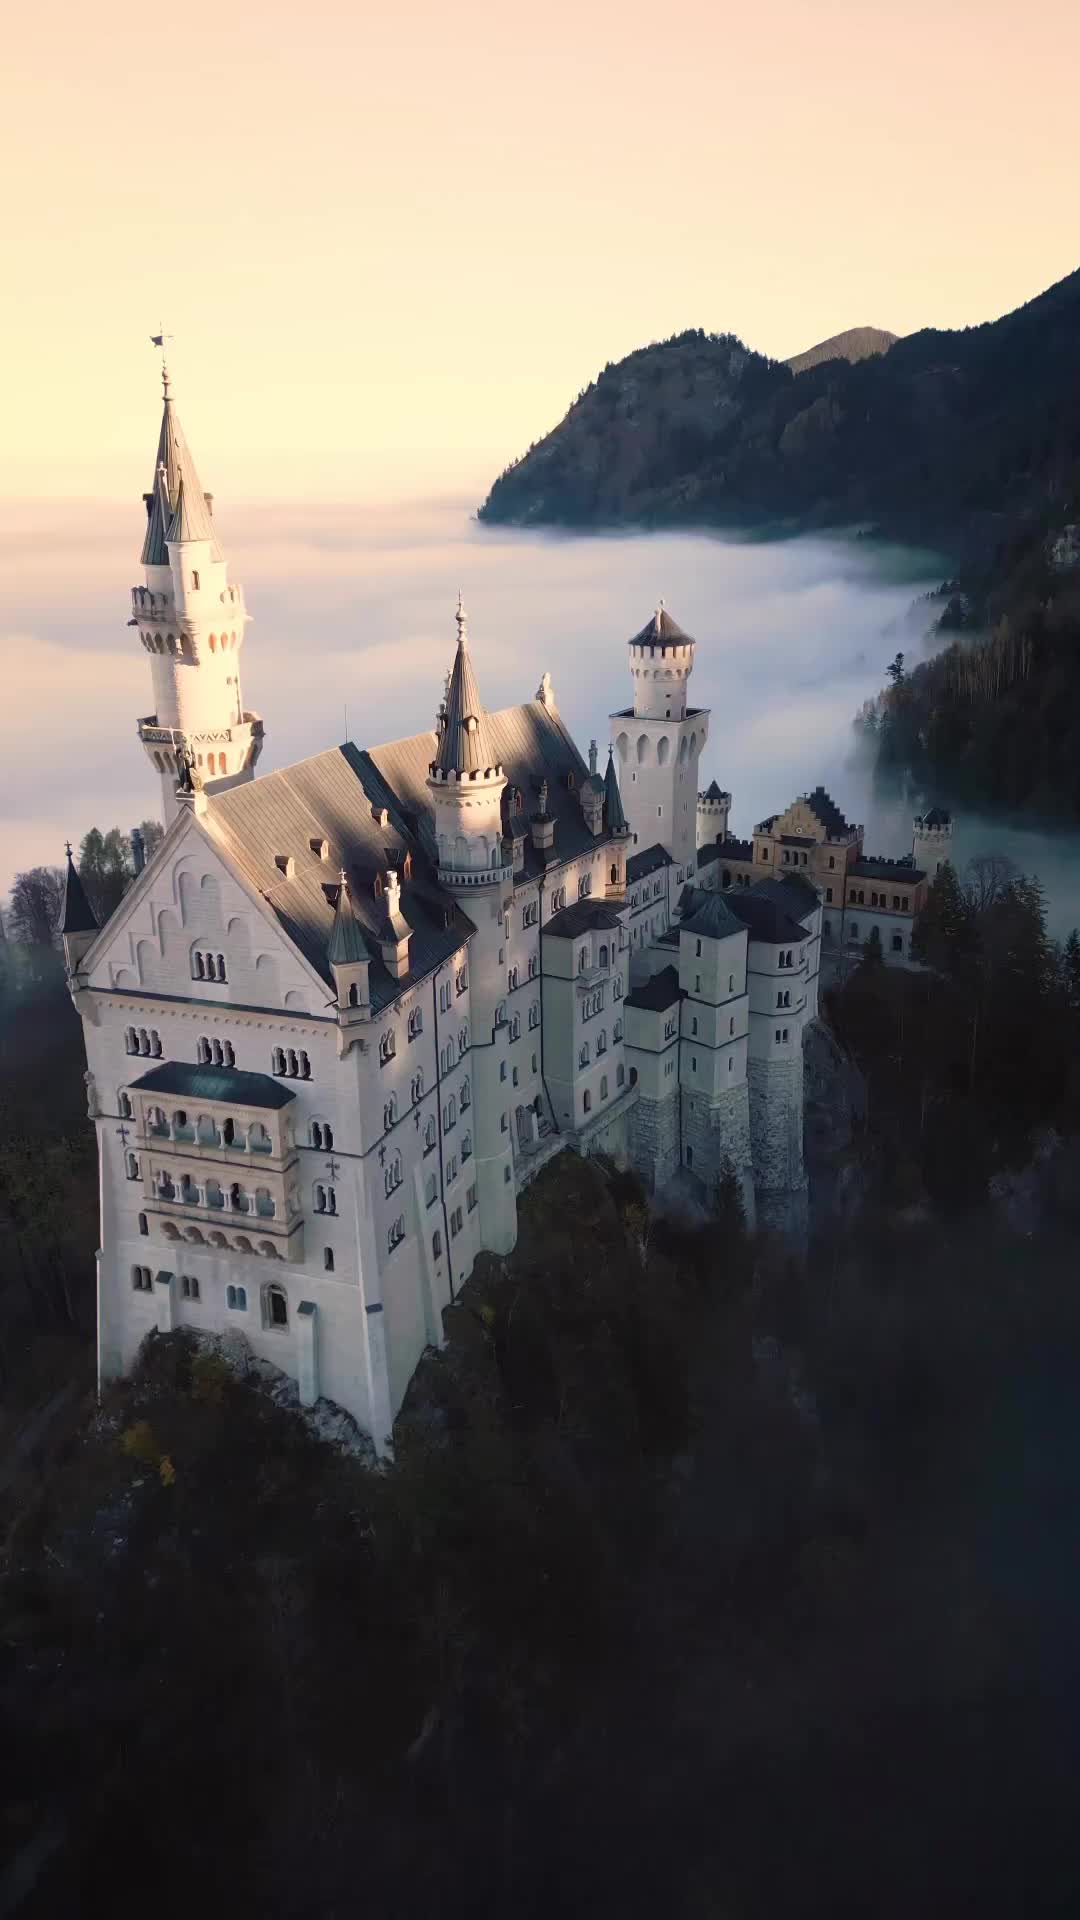 Germany’s Most Beautiful Castle in Mystical Fog